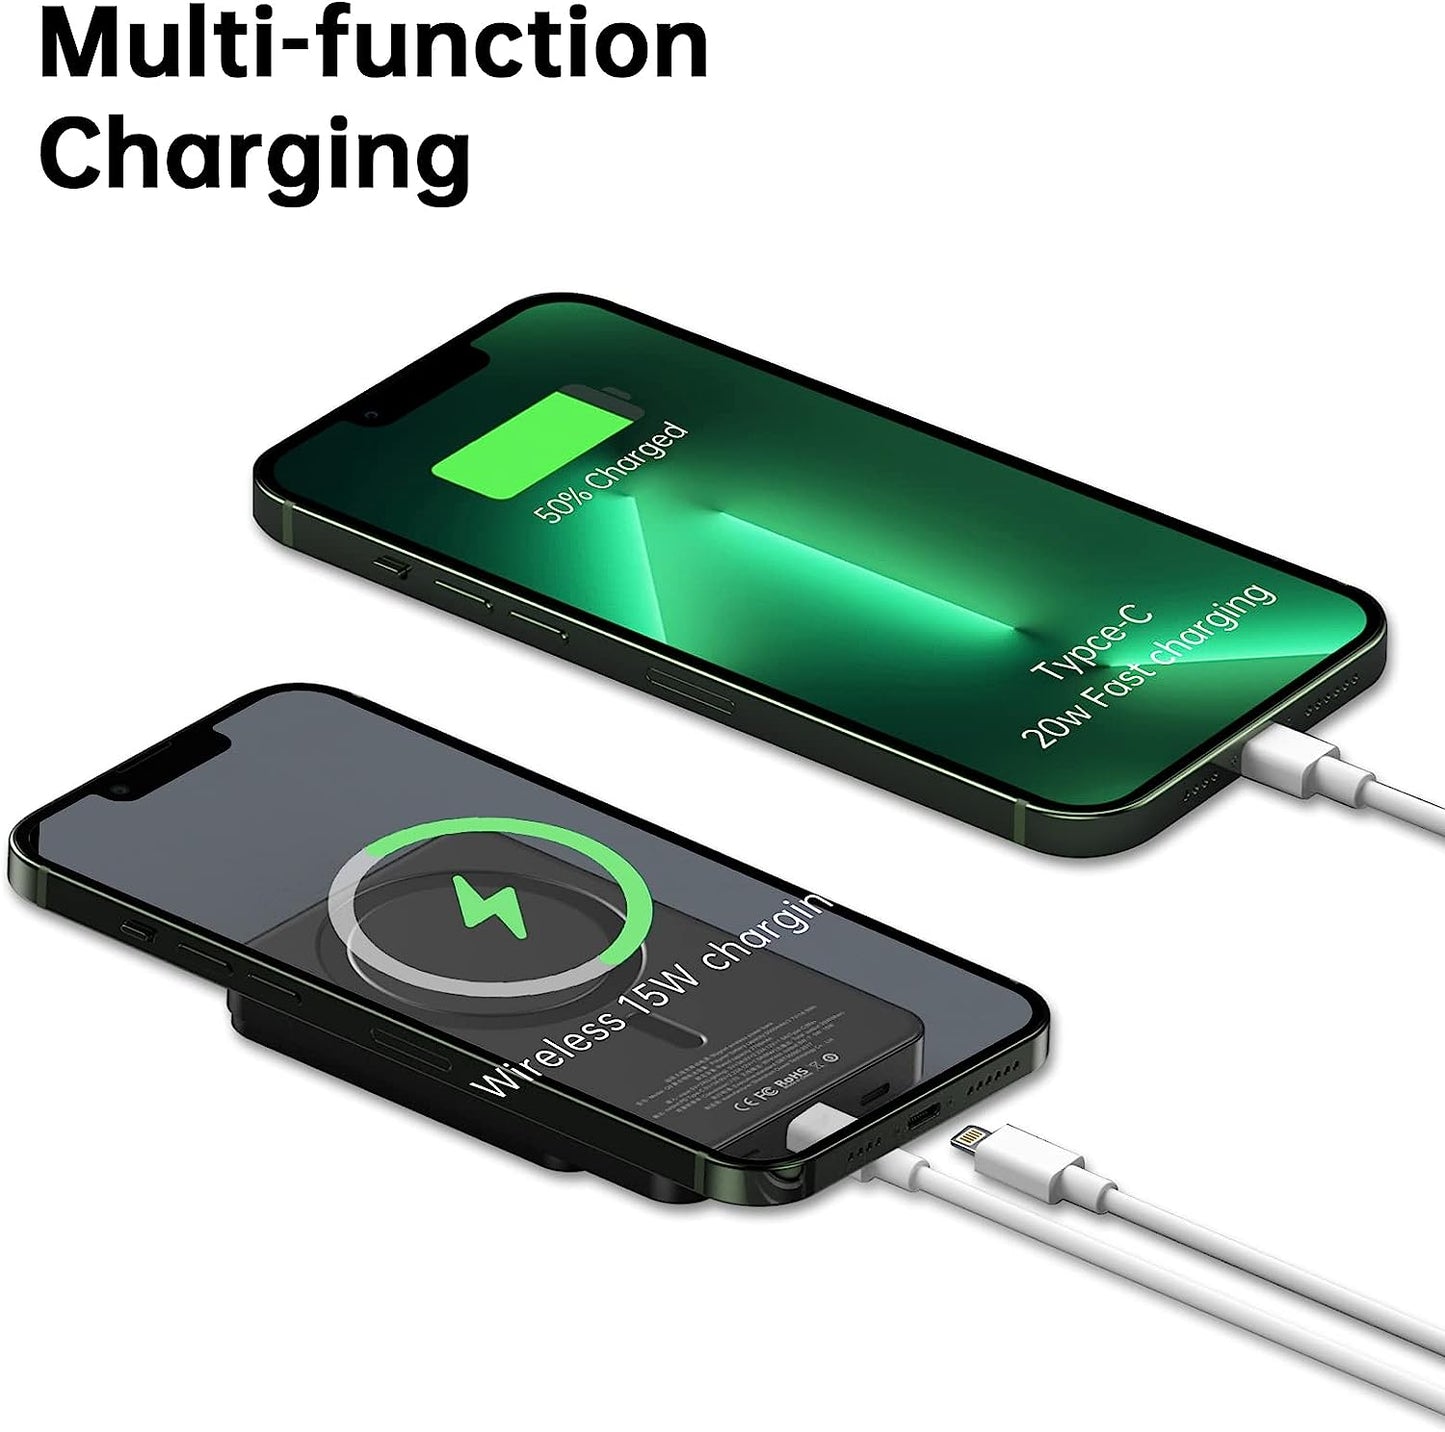 Magnetic & Wired Power Bank with Digital Screen